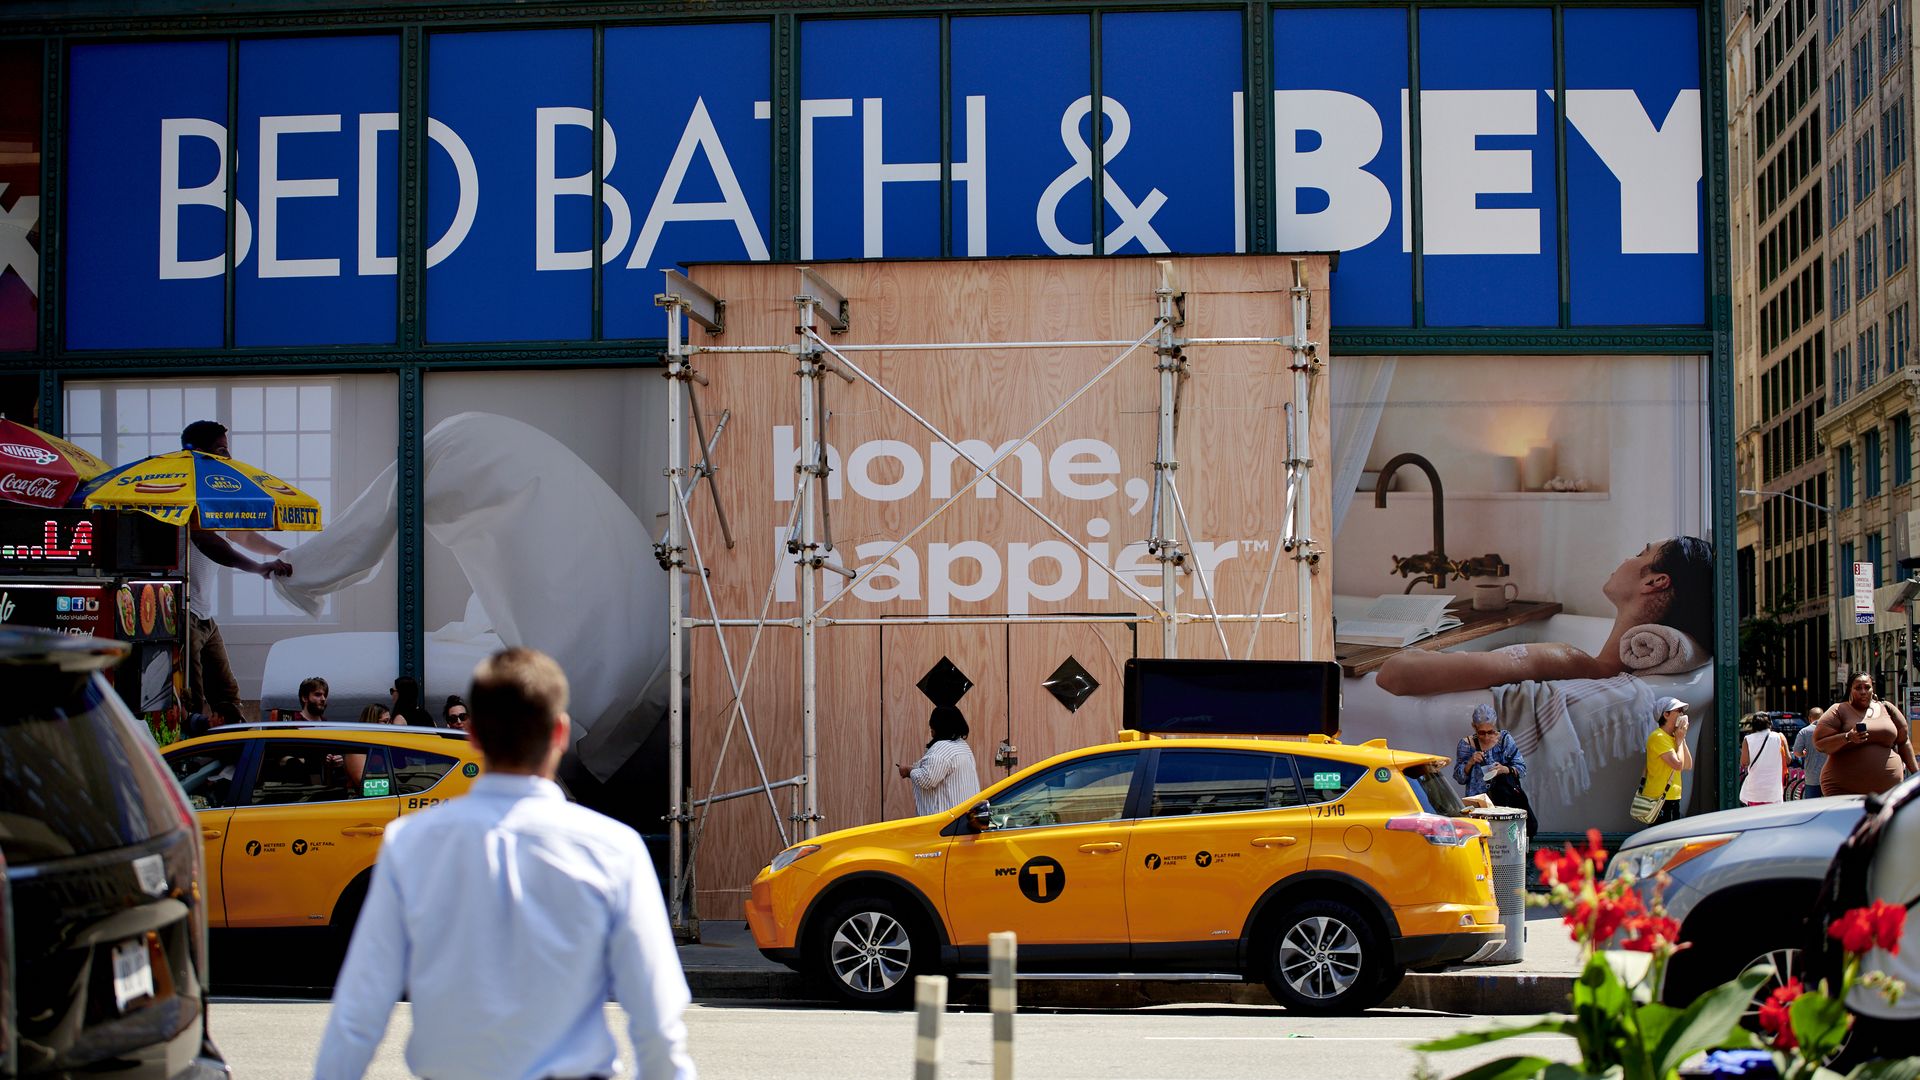 A Bed Bath & Beyond store located on a city street is undergoing renovations, with the exterior covered in scaffolding.